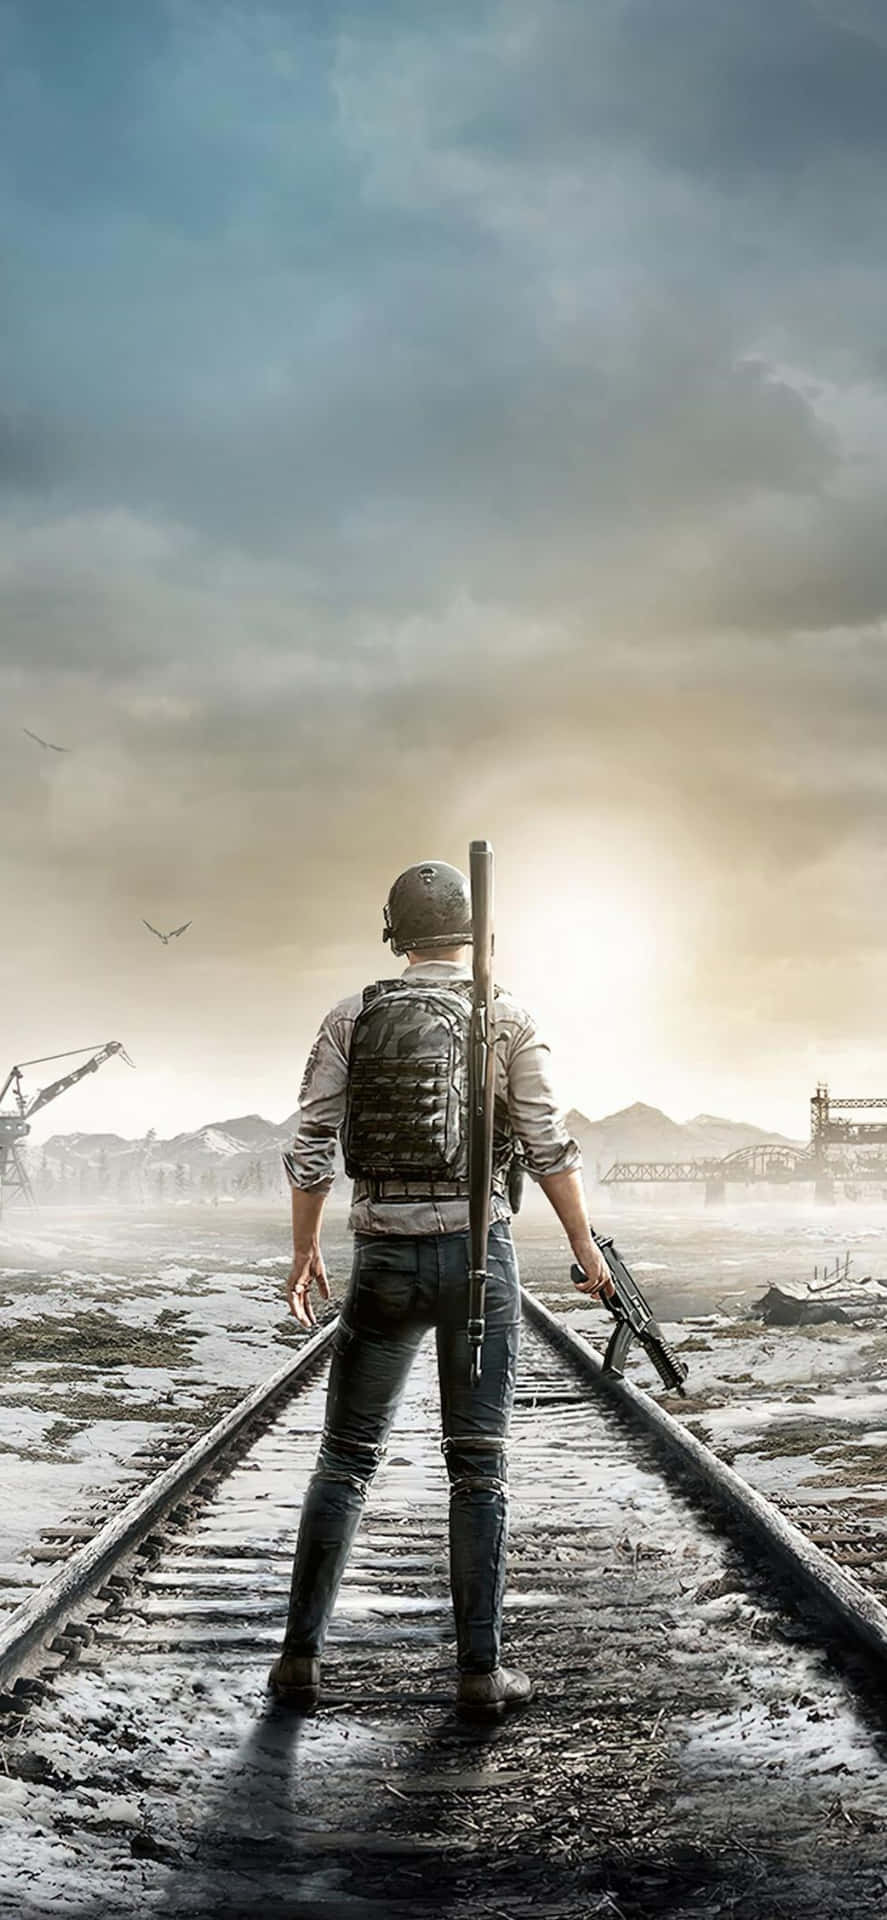 Step Into The Post-Apocalyptic World with the Iphone X&Metro Exodus